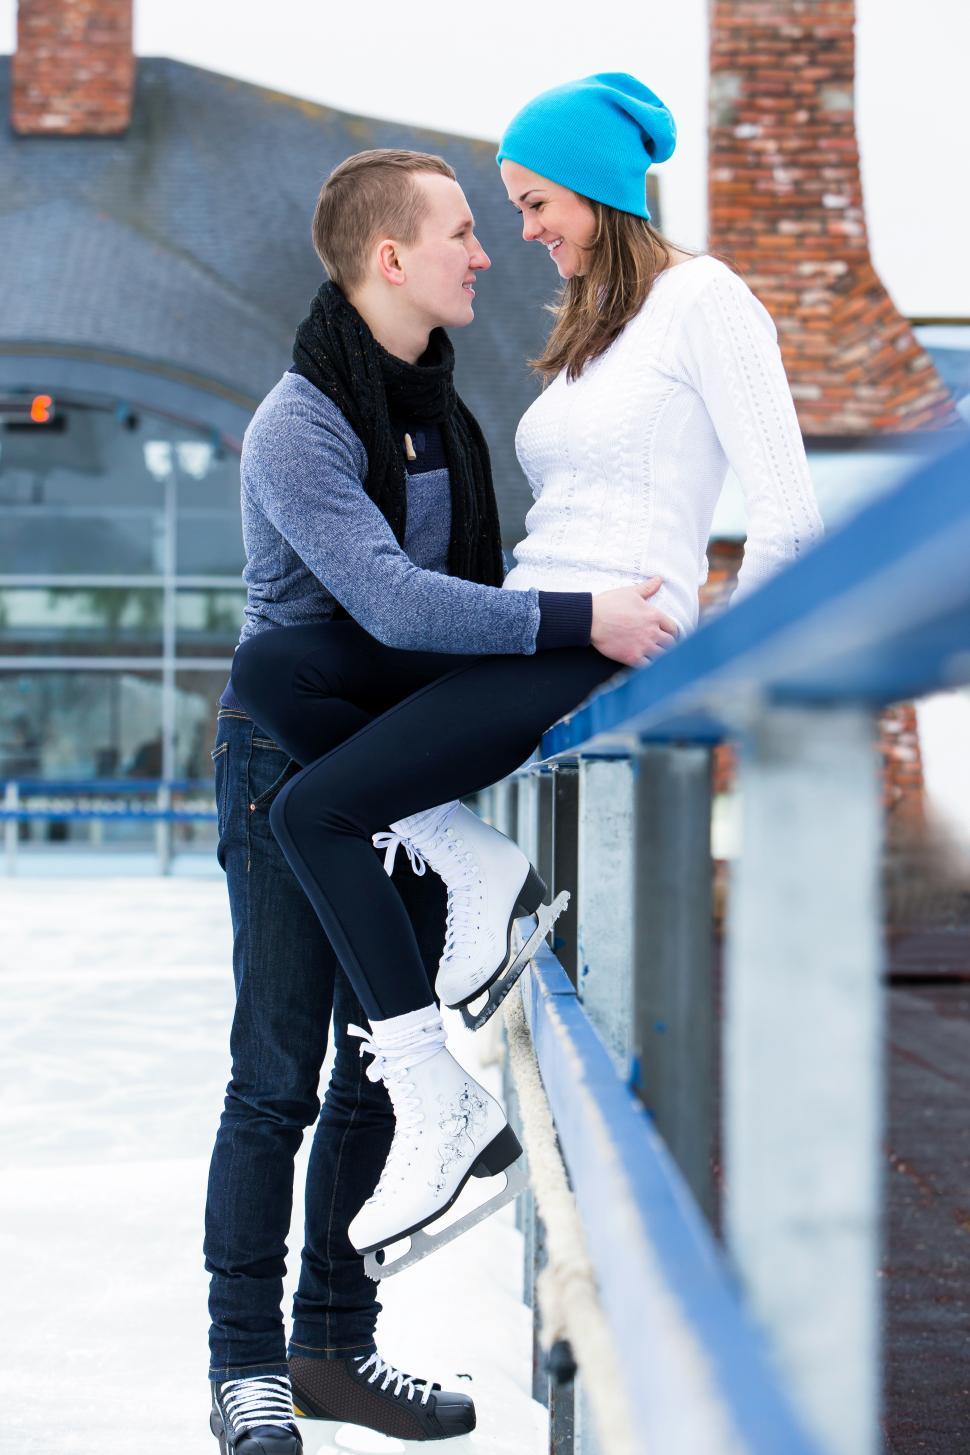 Free Image of Couple on the ice rink 